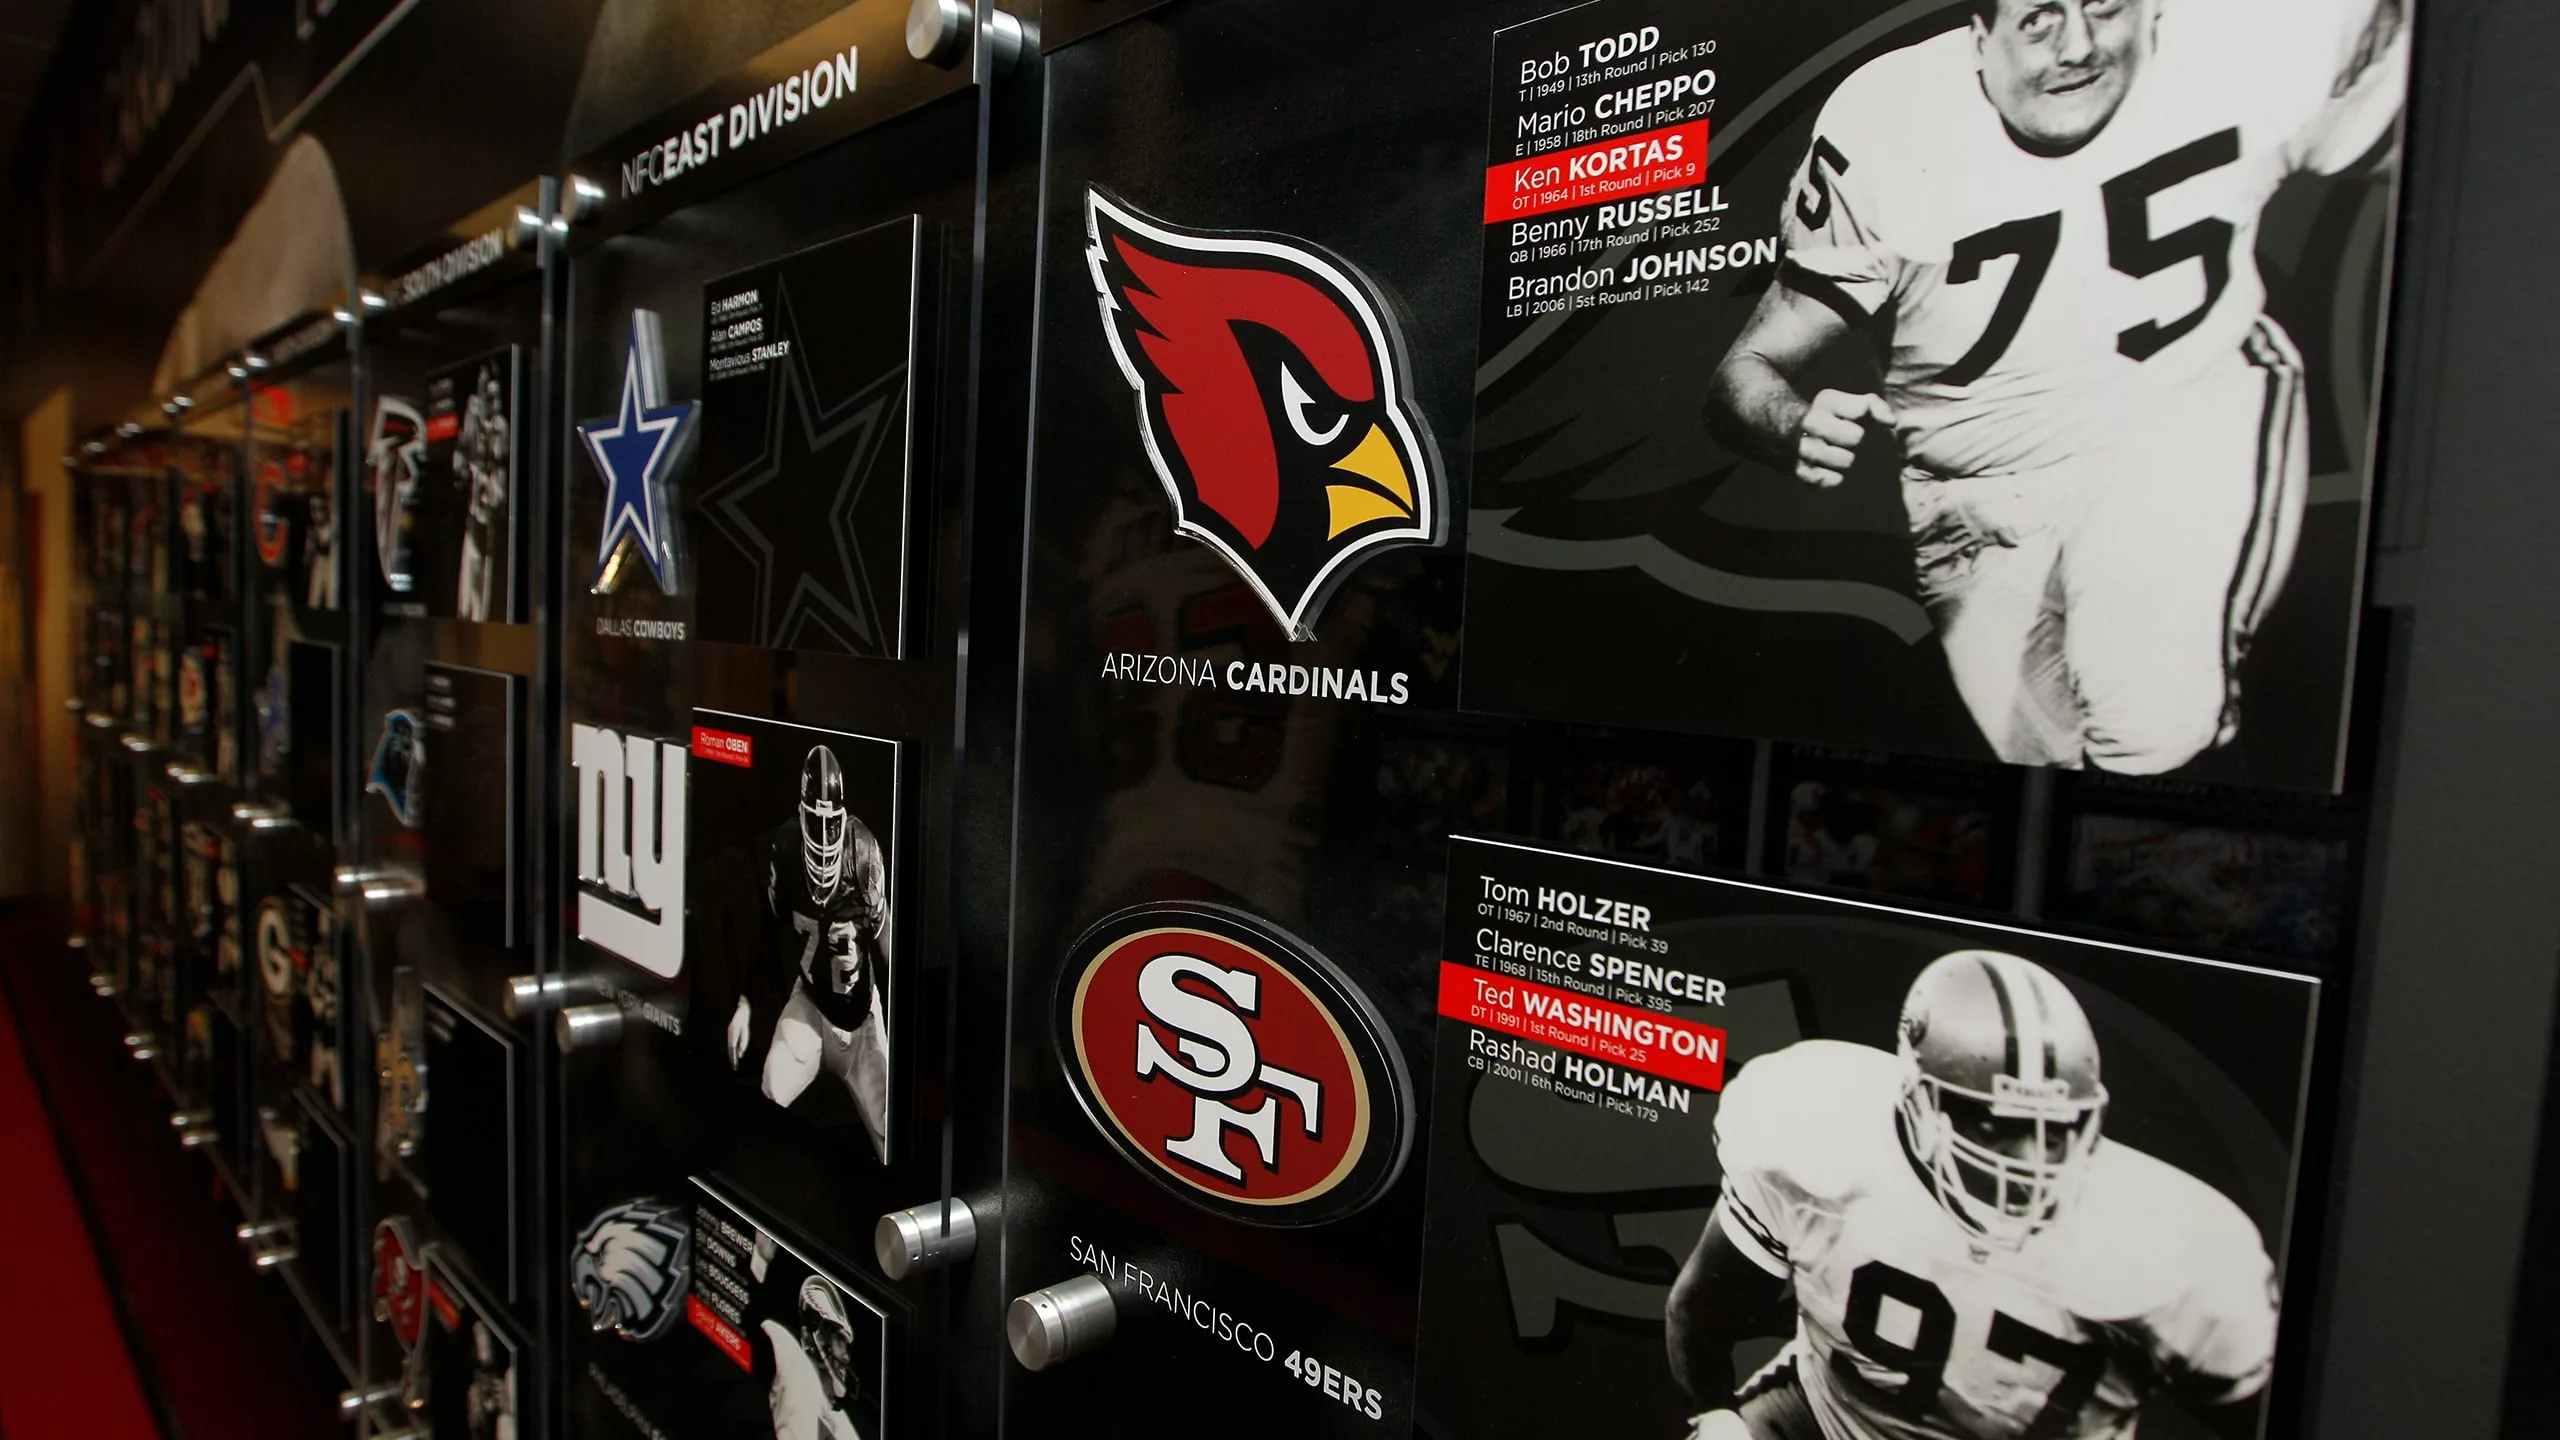 Louisville Football players in the NFL display